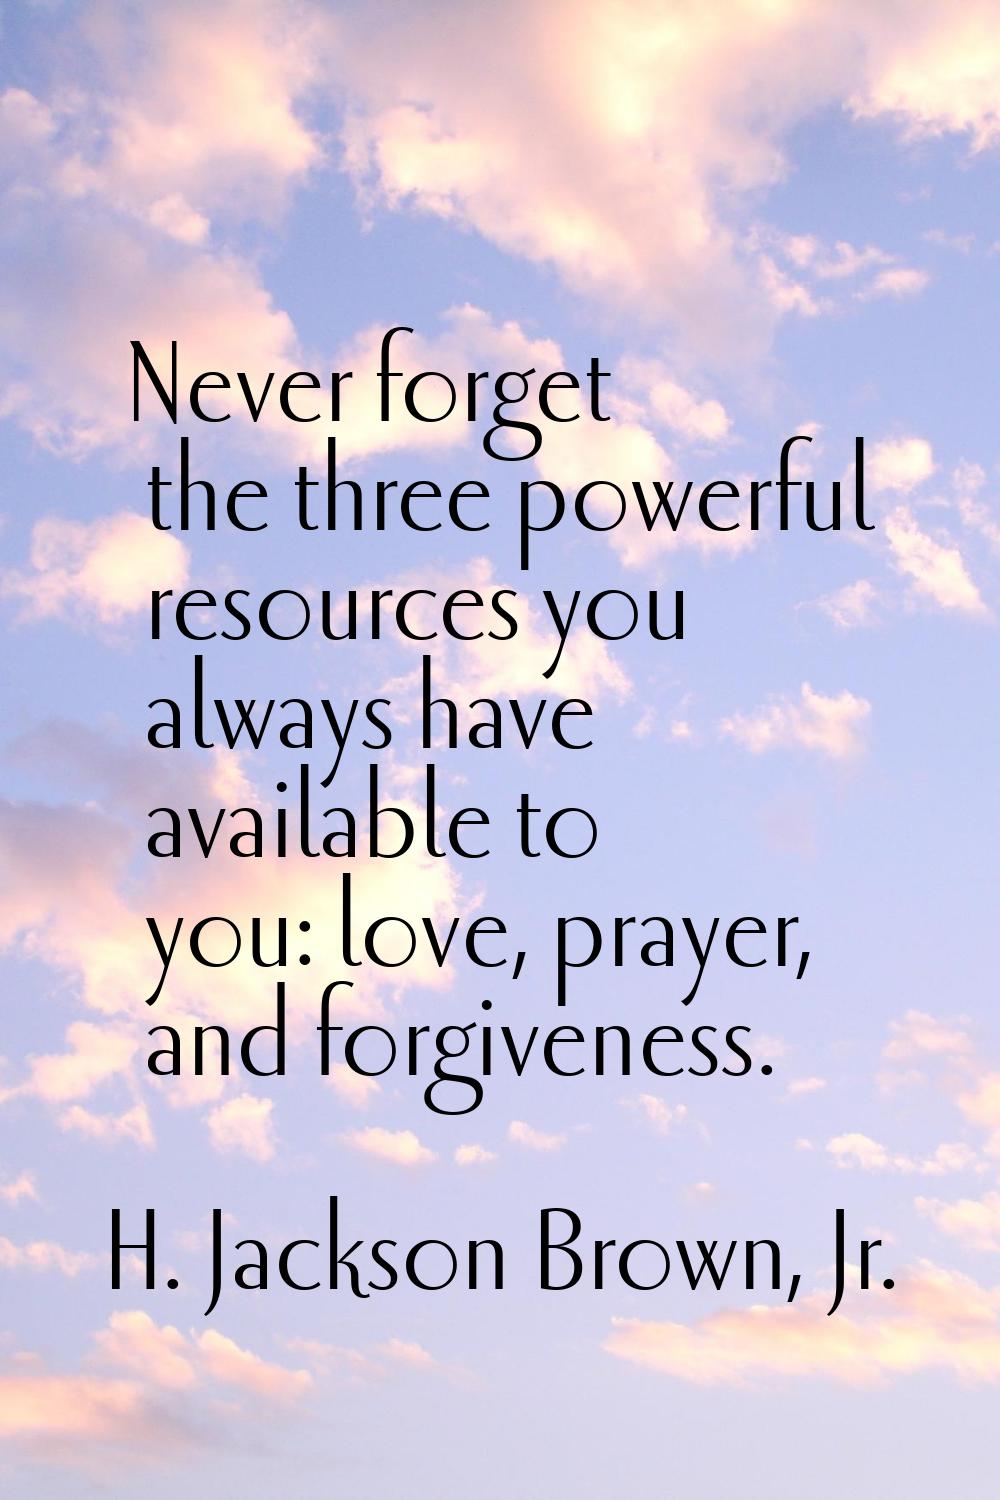 Never forget the three powerful resources you always have available to you: love, prayer, and forgi